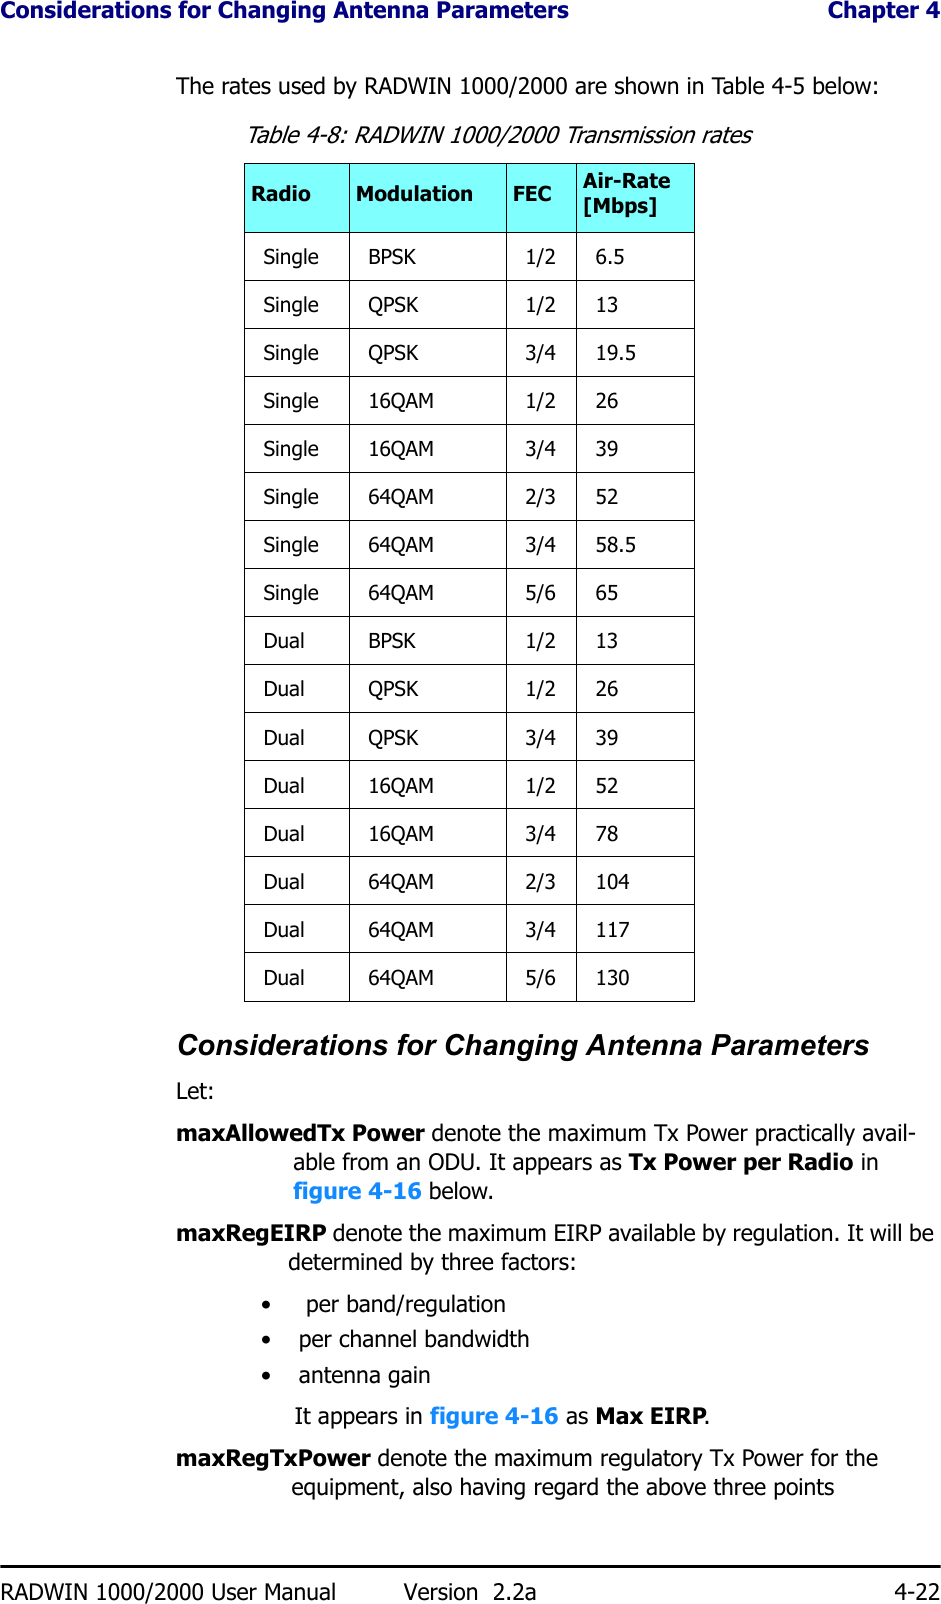 Considerations for Changing Antenna Parameters  Chapter 4RADWIN 1000/2000 User Manual Version  2.2a 4-22The rates used by RADWIN 1000/2000 are shown in Table 4-5 below:Considerations for Changing Antenna ParametersLet:maxAllowedTx Power denote the maximum Tx Power practically avail-able from an ODU. It appears as Tx Power per Radio in figure 4-16 below.maxRegEIRP denote the maximum EIRP available by regulation. It will be determined by three factors:•  per band/regulation• per channel bandwidth•antenna gainIt appears in figure 4-16 as Max EIRP.maxRegTxPower denote the maximum regulatory Tx Power for the equipment, also having regard the above three pointsTable 4-8: RADWIN 1000/2000 Transmission ratesRadio Modulation FEC Air-Rate [Mbps]Single BPSK 1/2 6.5Single QPSK 1/2 13Single QPSK 3/4 19.5Single 16QAM 1/2 26Single 16QAM 3/4 39Single 64QAM 2/3 52Single 64QAM 3/4 58.5Single 64QAM 5/6 65Dual BPSK 1/2 13Dual QPSK 1/2 26Dual QPSK 3/4 39Dual 16QAM 1/2 52Dual 16QAM 3/4 78Dual 64QAM 2/3 104Dual 64QAM 3/4 117Dual 64QAM 5/6 130